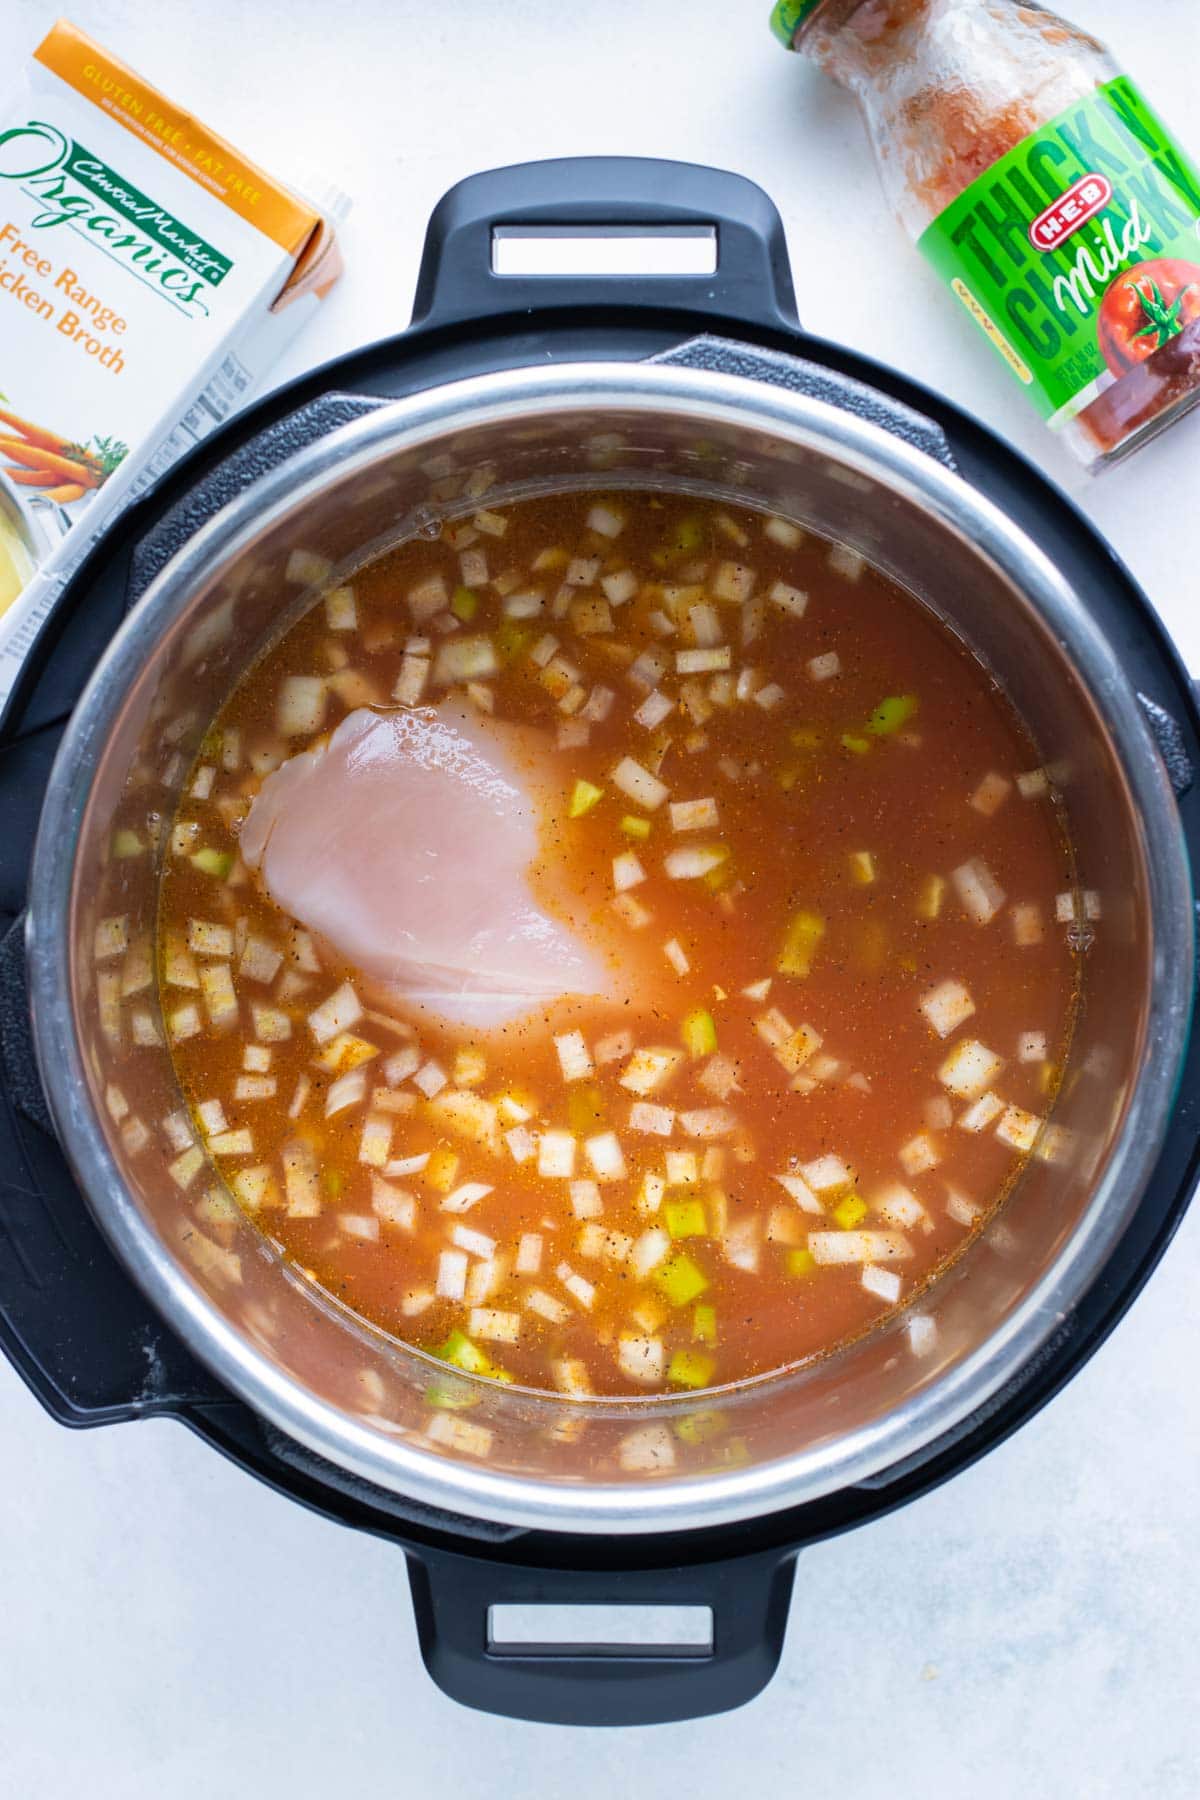 Taco seasoning, chicken breast, salsa, and chicken broth are added to the instant pot.